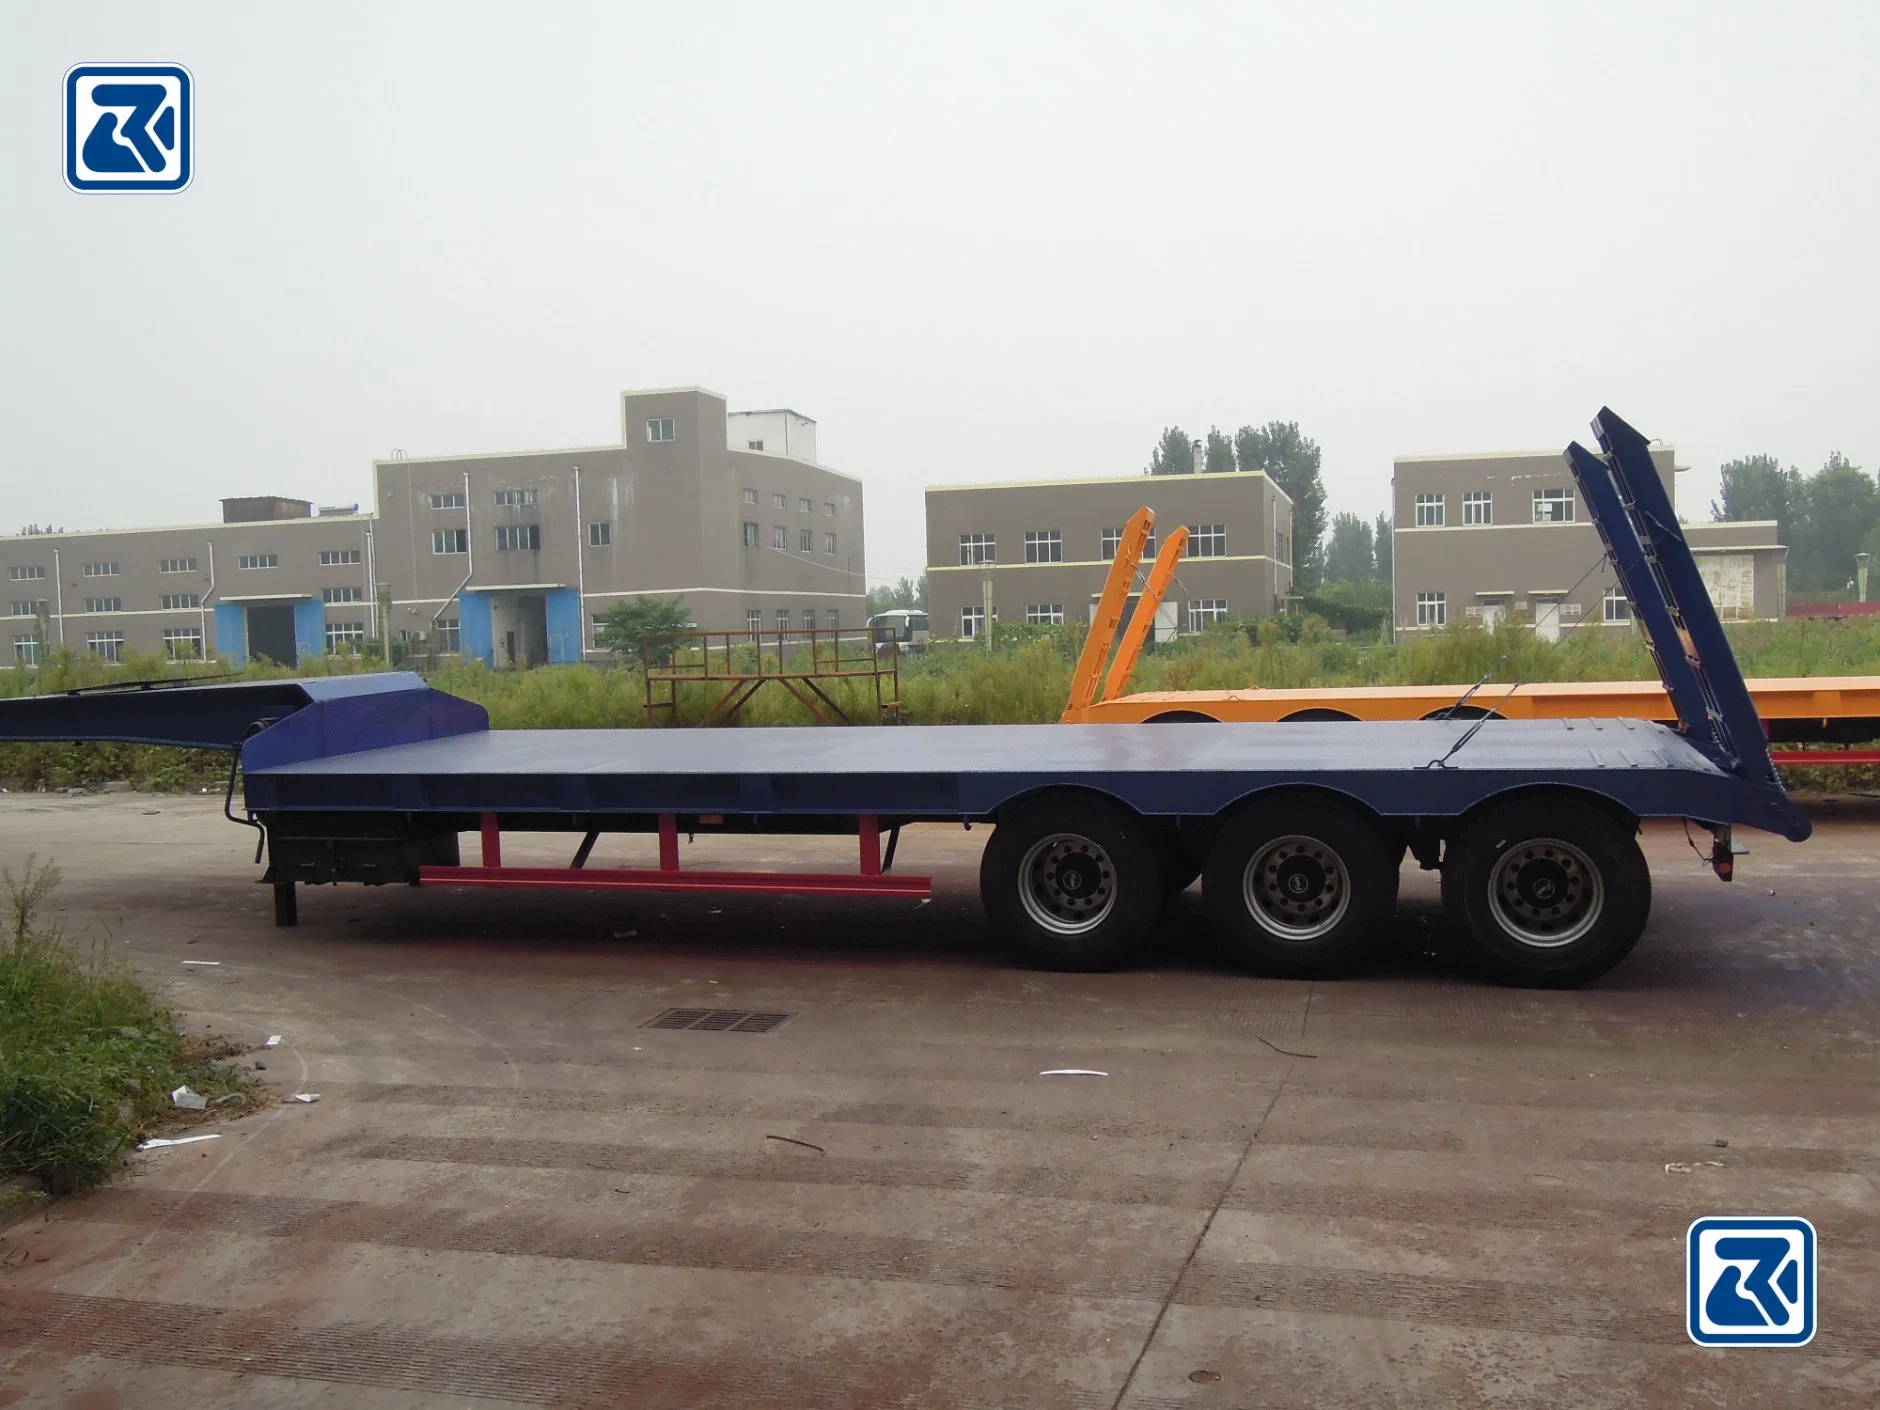 CCC ISO 3 Axles Truck Trailer /Tri Axle Low Bed, Low Loader Semi Trailer